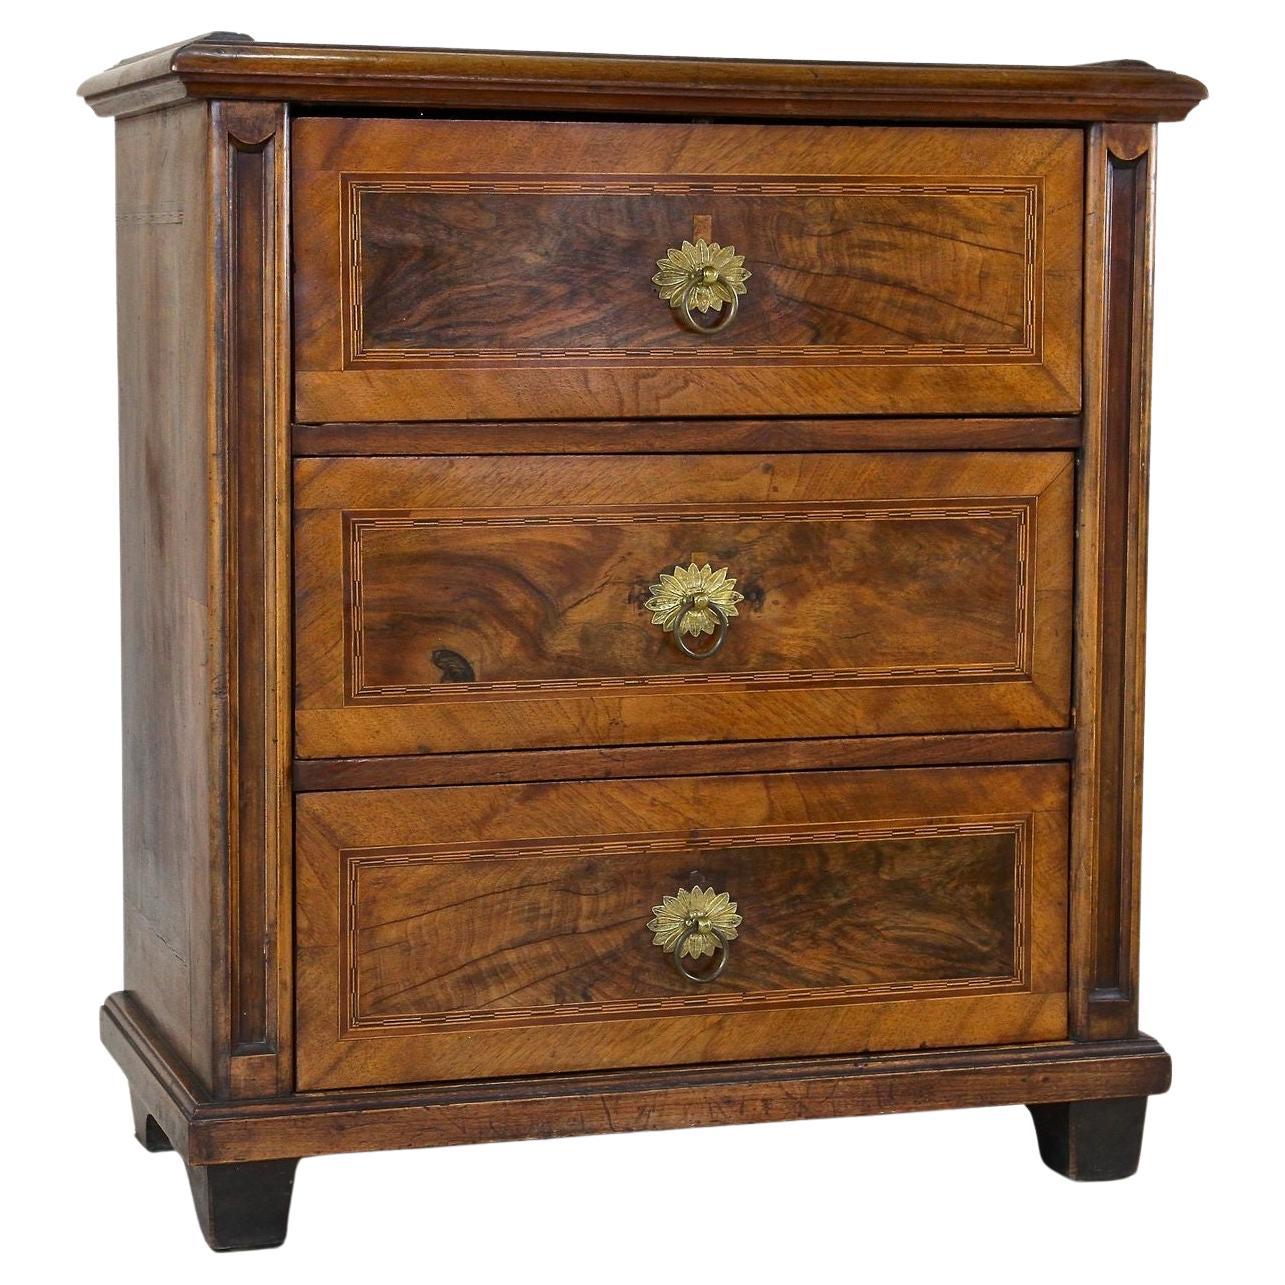 19th Century Biedermeier Nutwood Chest Of Drawers With Micro-Inlays, AT ca. 1850 For Sale